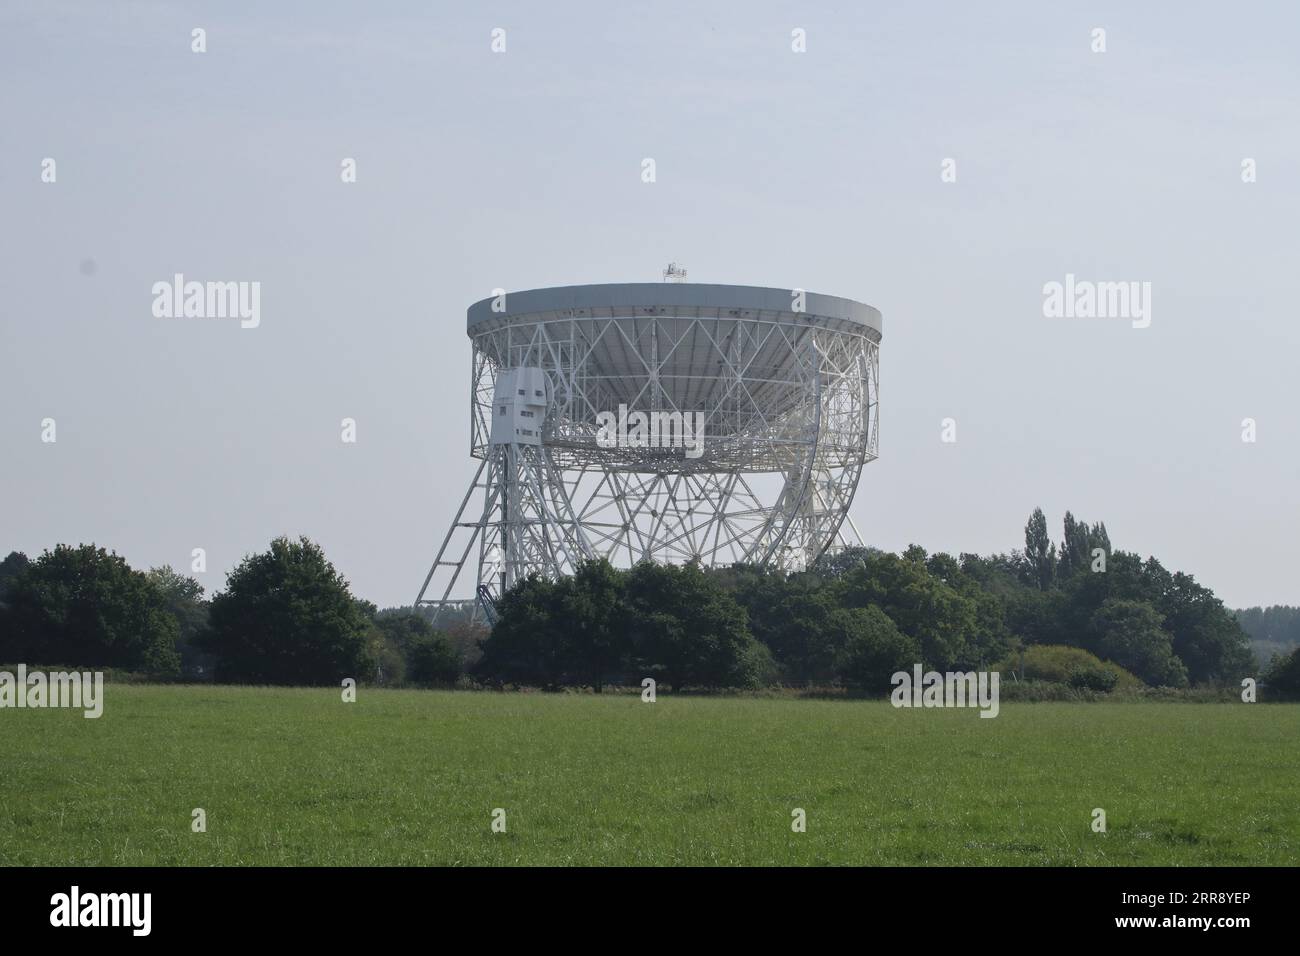 Cheshire England UK 6th September 2023 The Lovell telescope at The Jodrell Bank radio observatory site and arboretum.  The site at Lower Withington, Cheshire, is a visitor attraction.  The  observatory became a UNESCO World Heritage Site in 2019. Jodrell Bank, was named after William Jauderell, an archer whose descendants lived at the mansion, ©Ged Noonan/Alamy Stock Photo